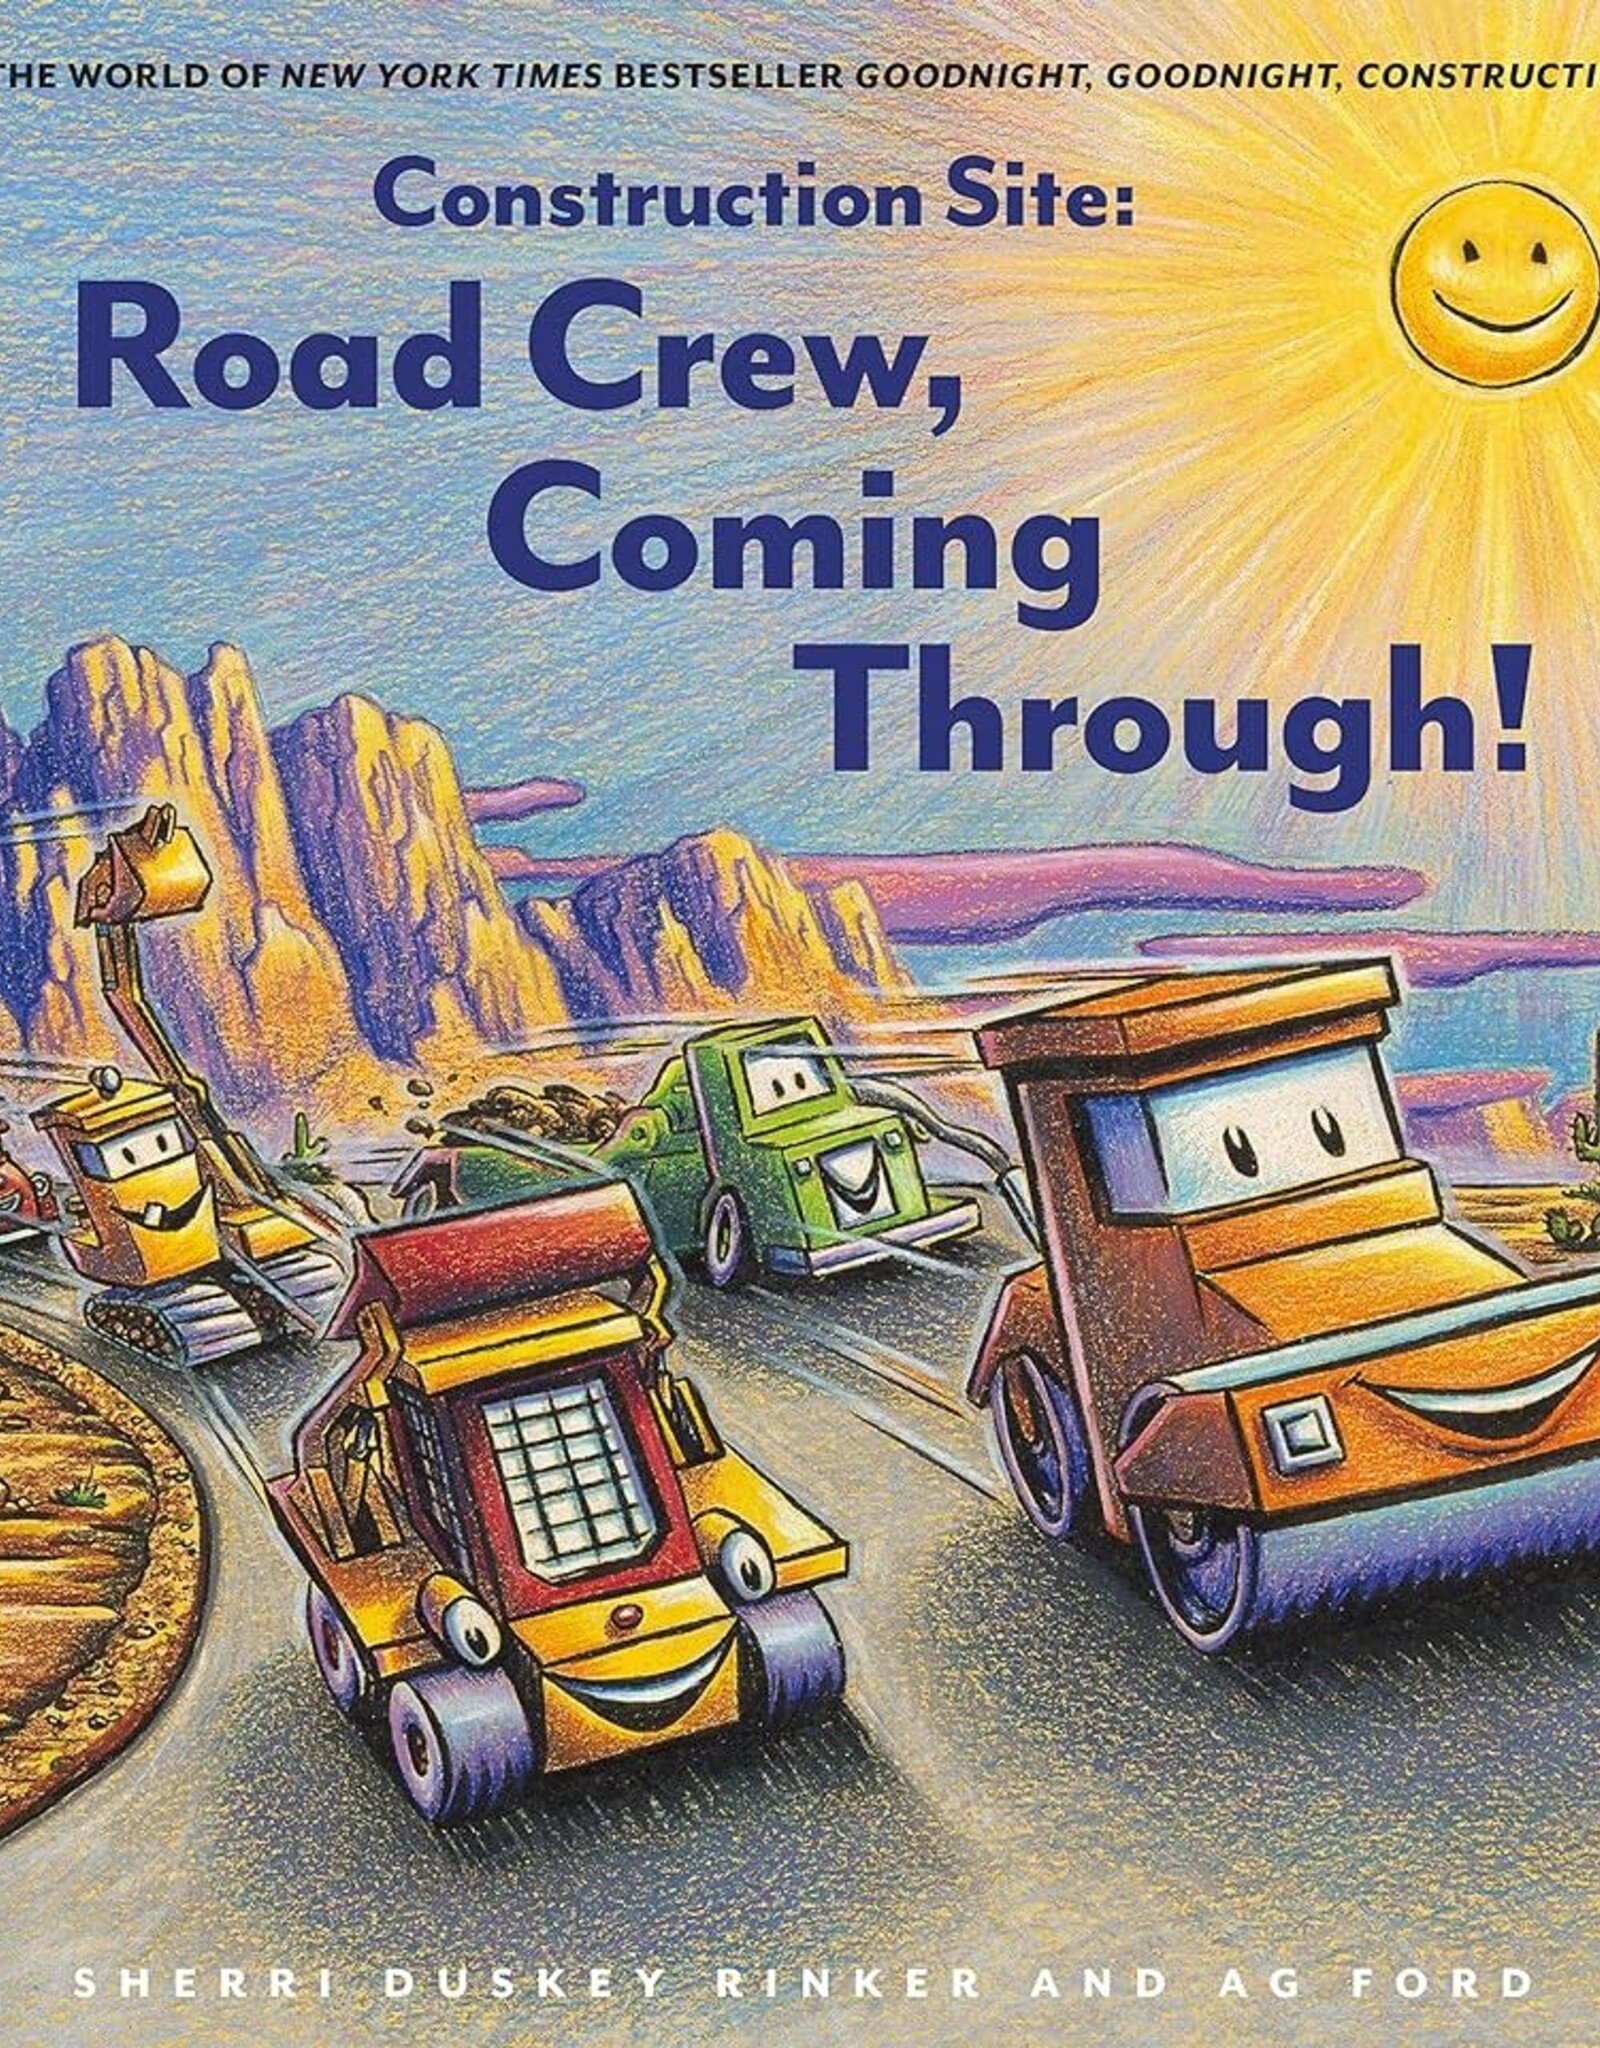 BOOK PUBLISHERS CONSTRUCTION SITE ROAD CREW, COMING THROUGH